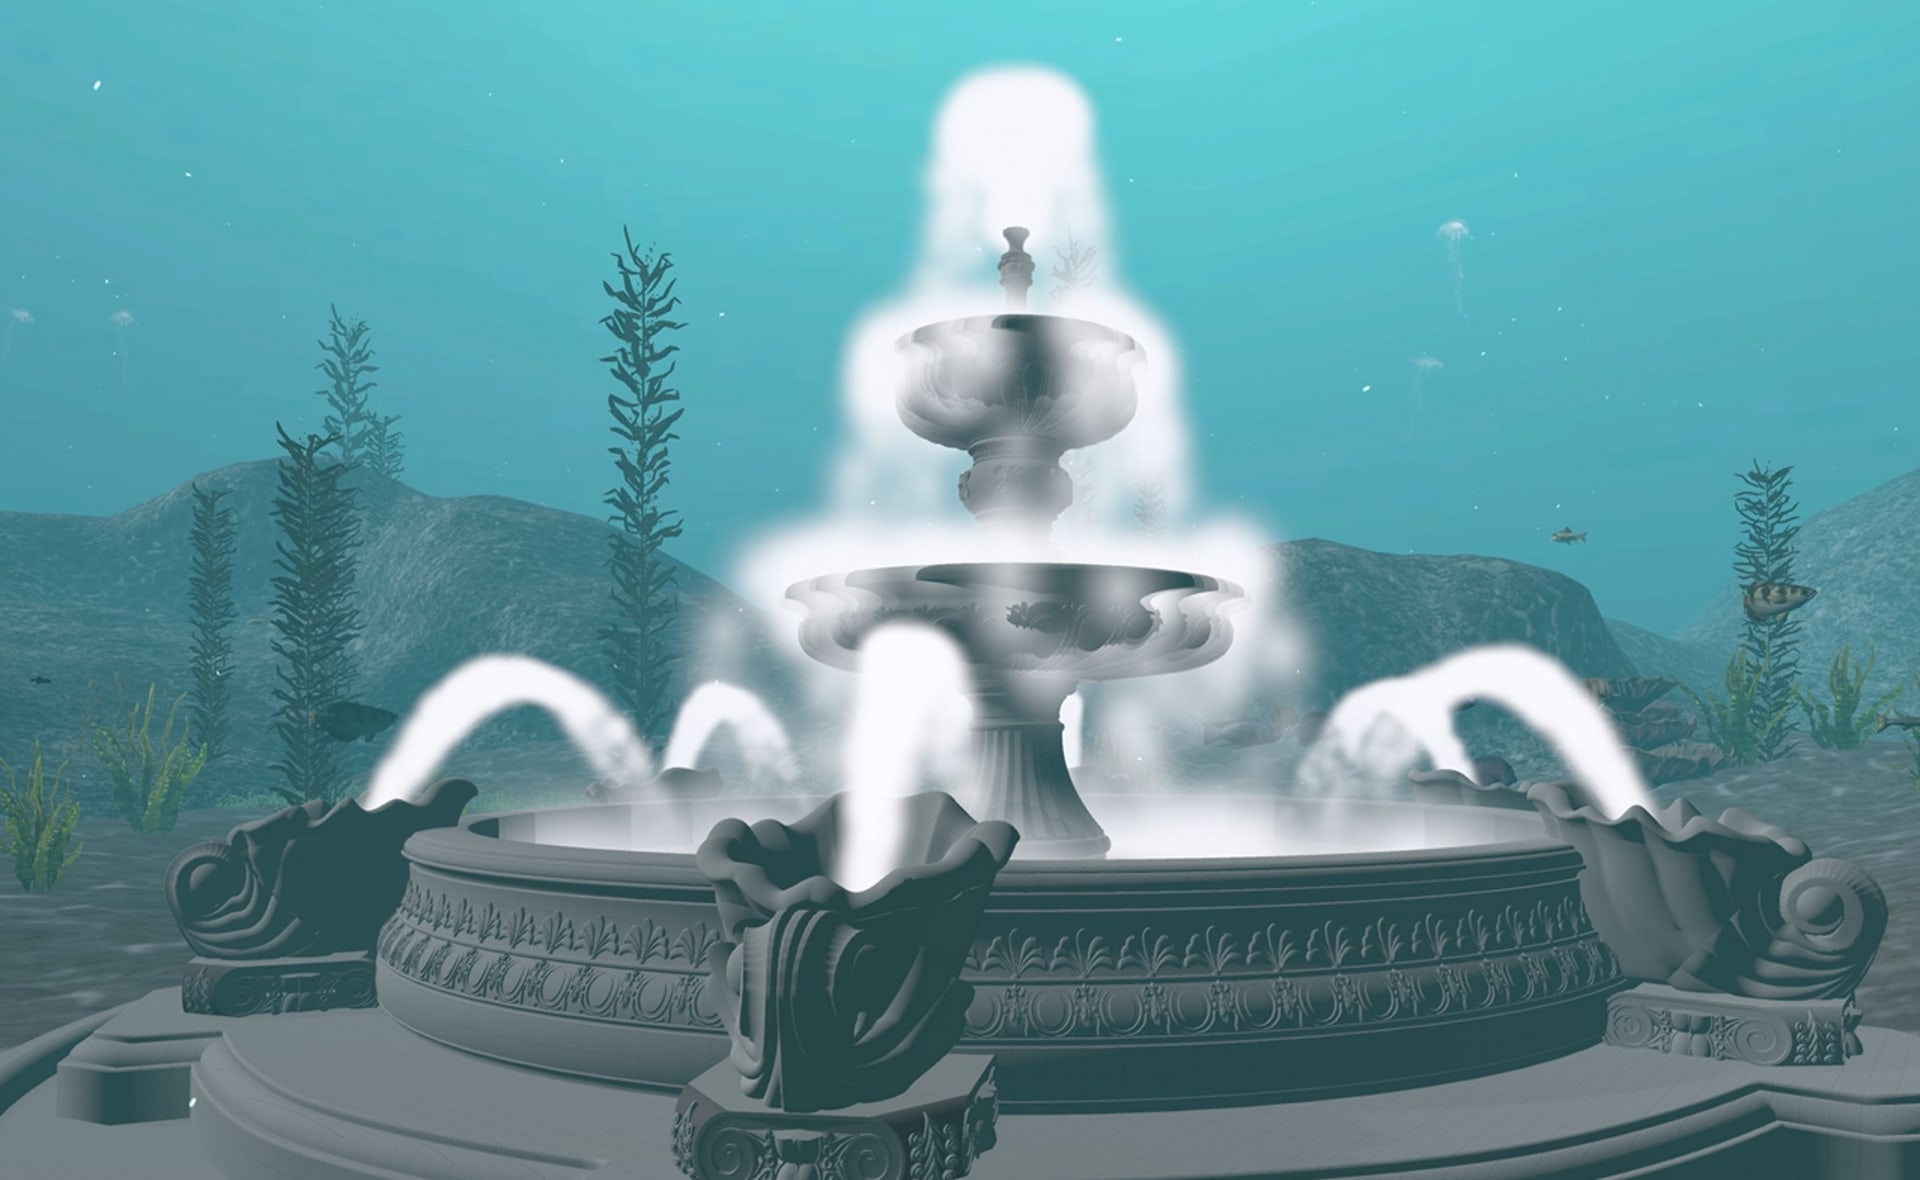 Close up of the fountain scene